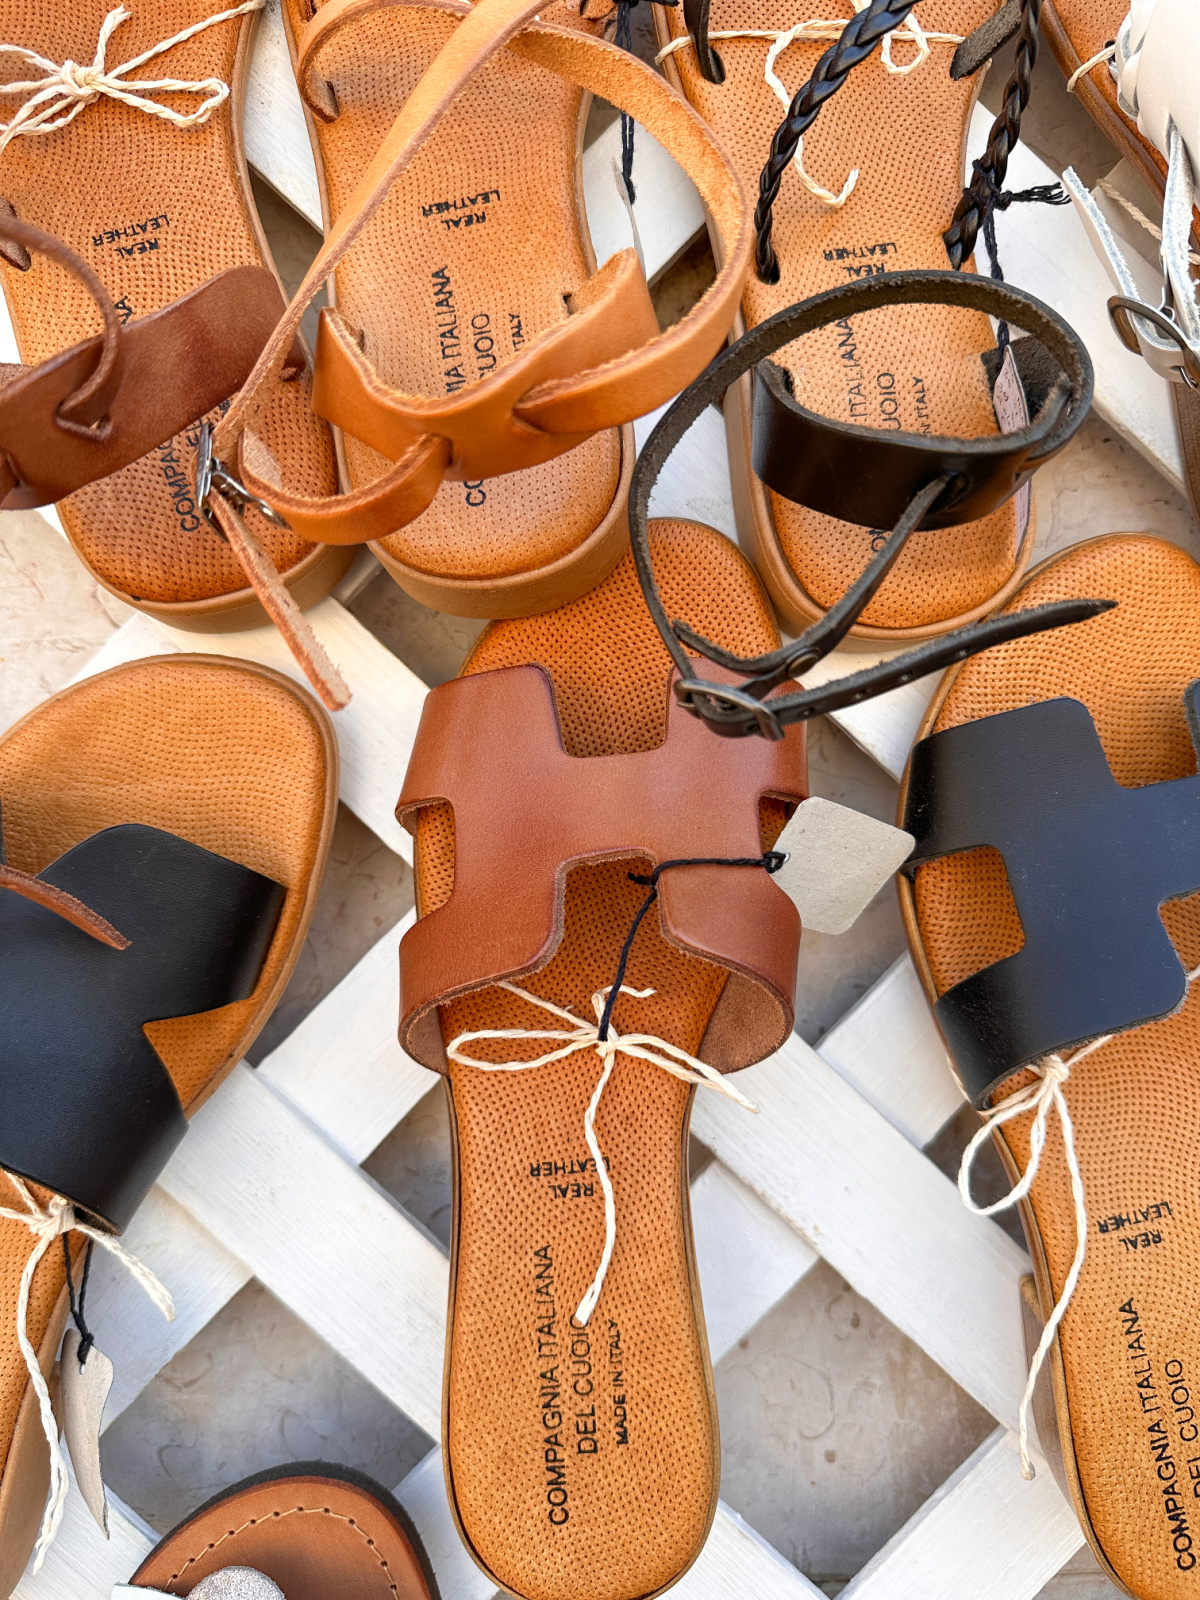 Leather sandals for sale in Lecce, Italy.